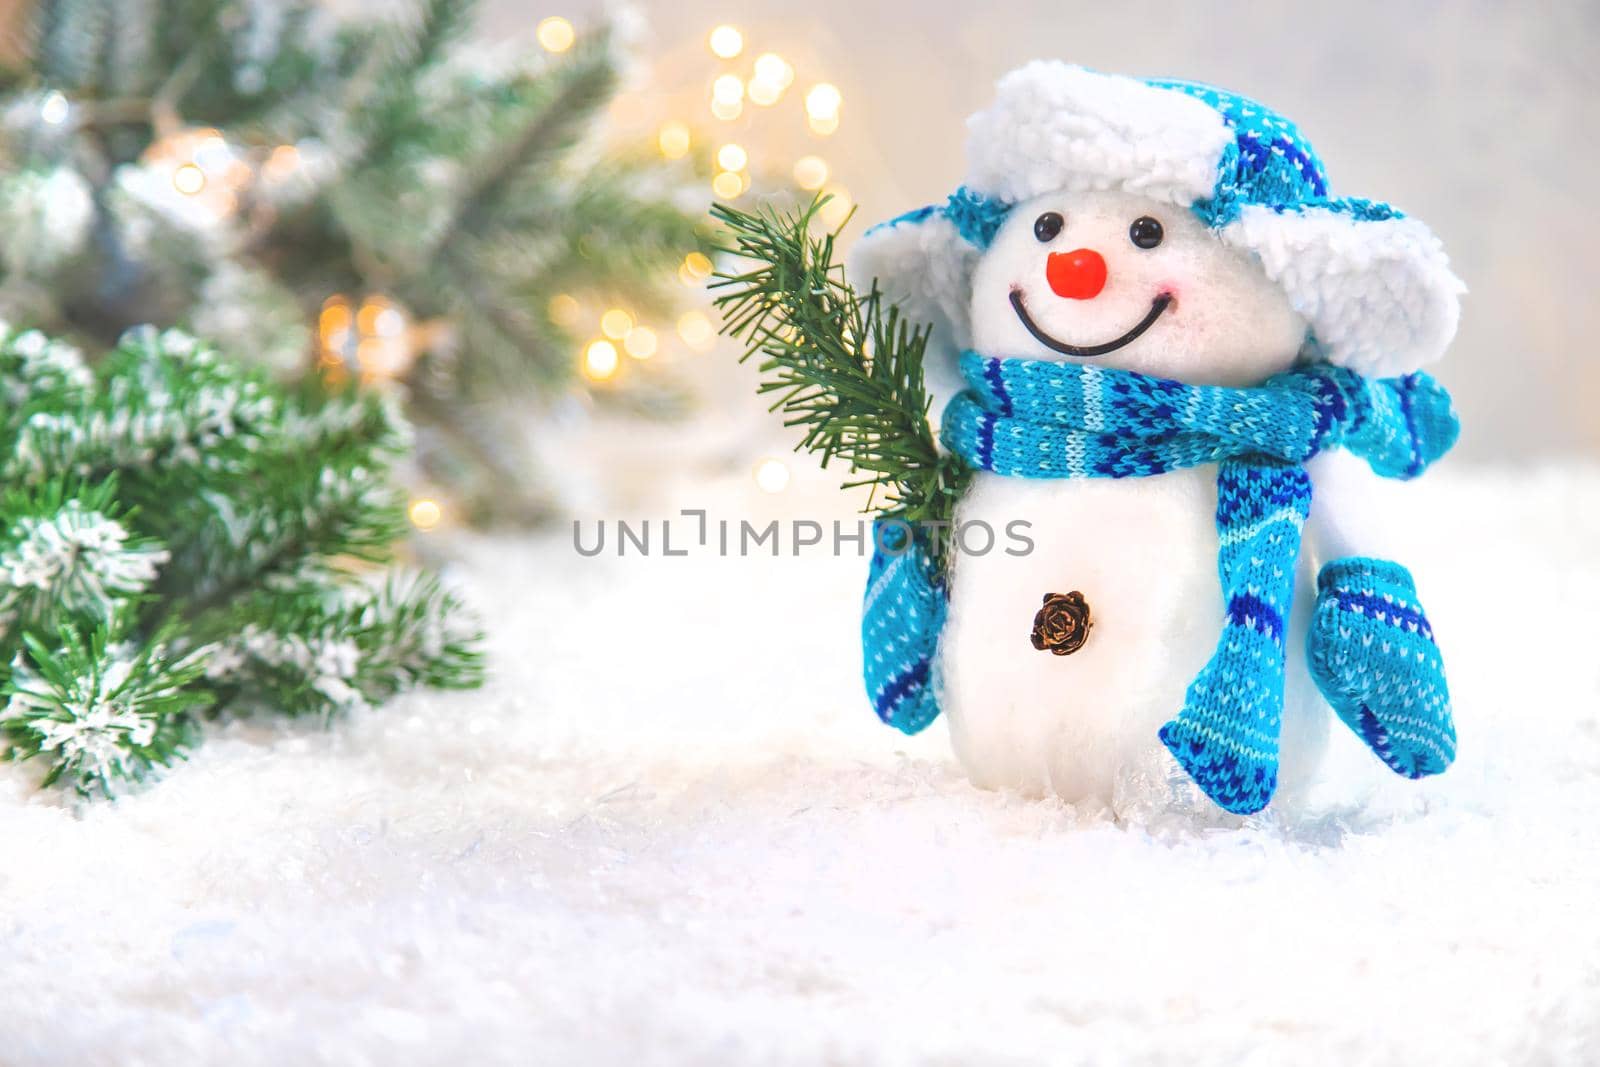 Beautiful christmas background with decor. Selective focus. Holiday.